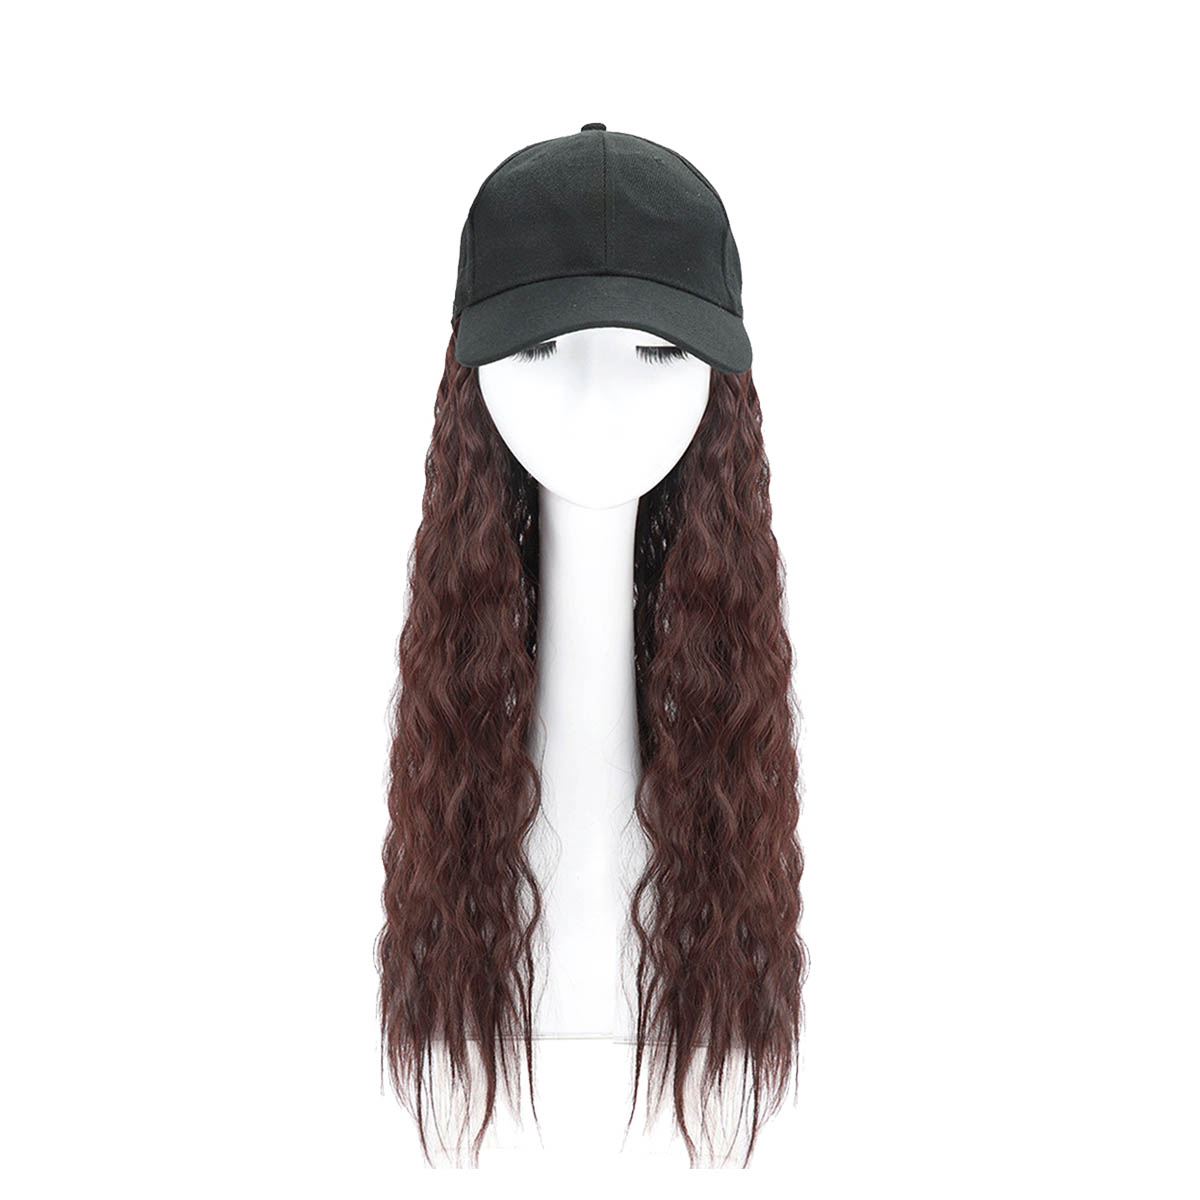 Woman-Girl-Cap-Wig-Hat-Light-Long-Wavy-Halloween-Party-Curly--Club-Winter-1619885-6